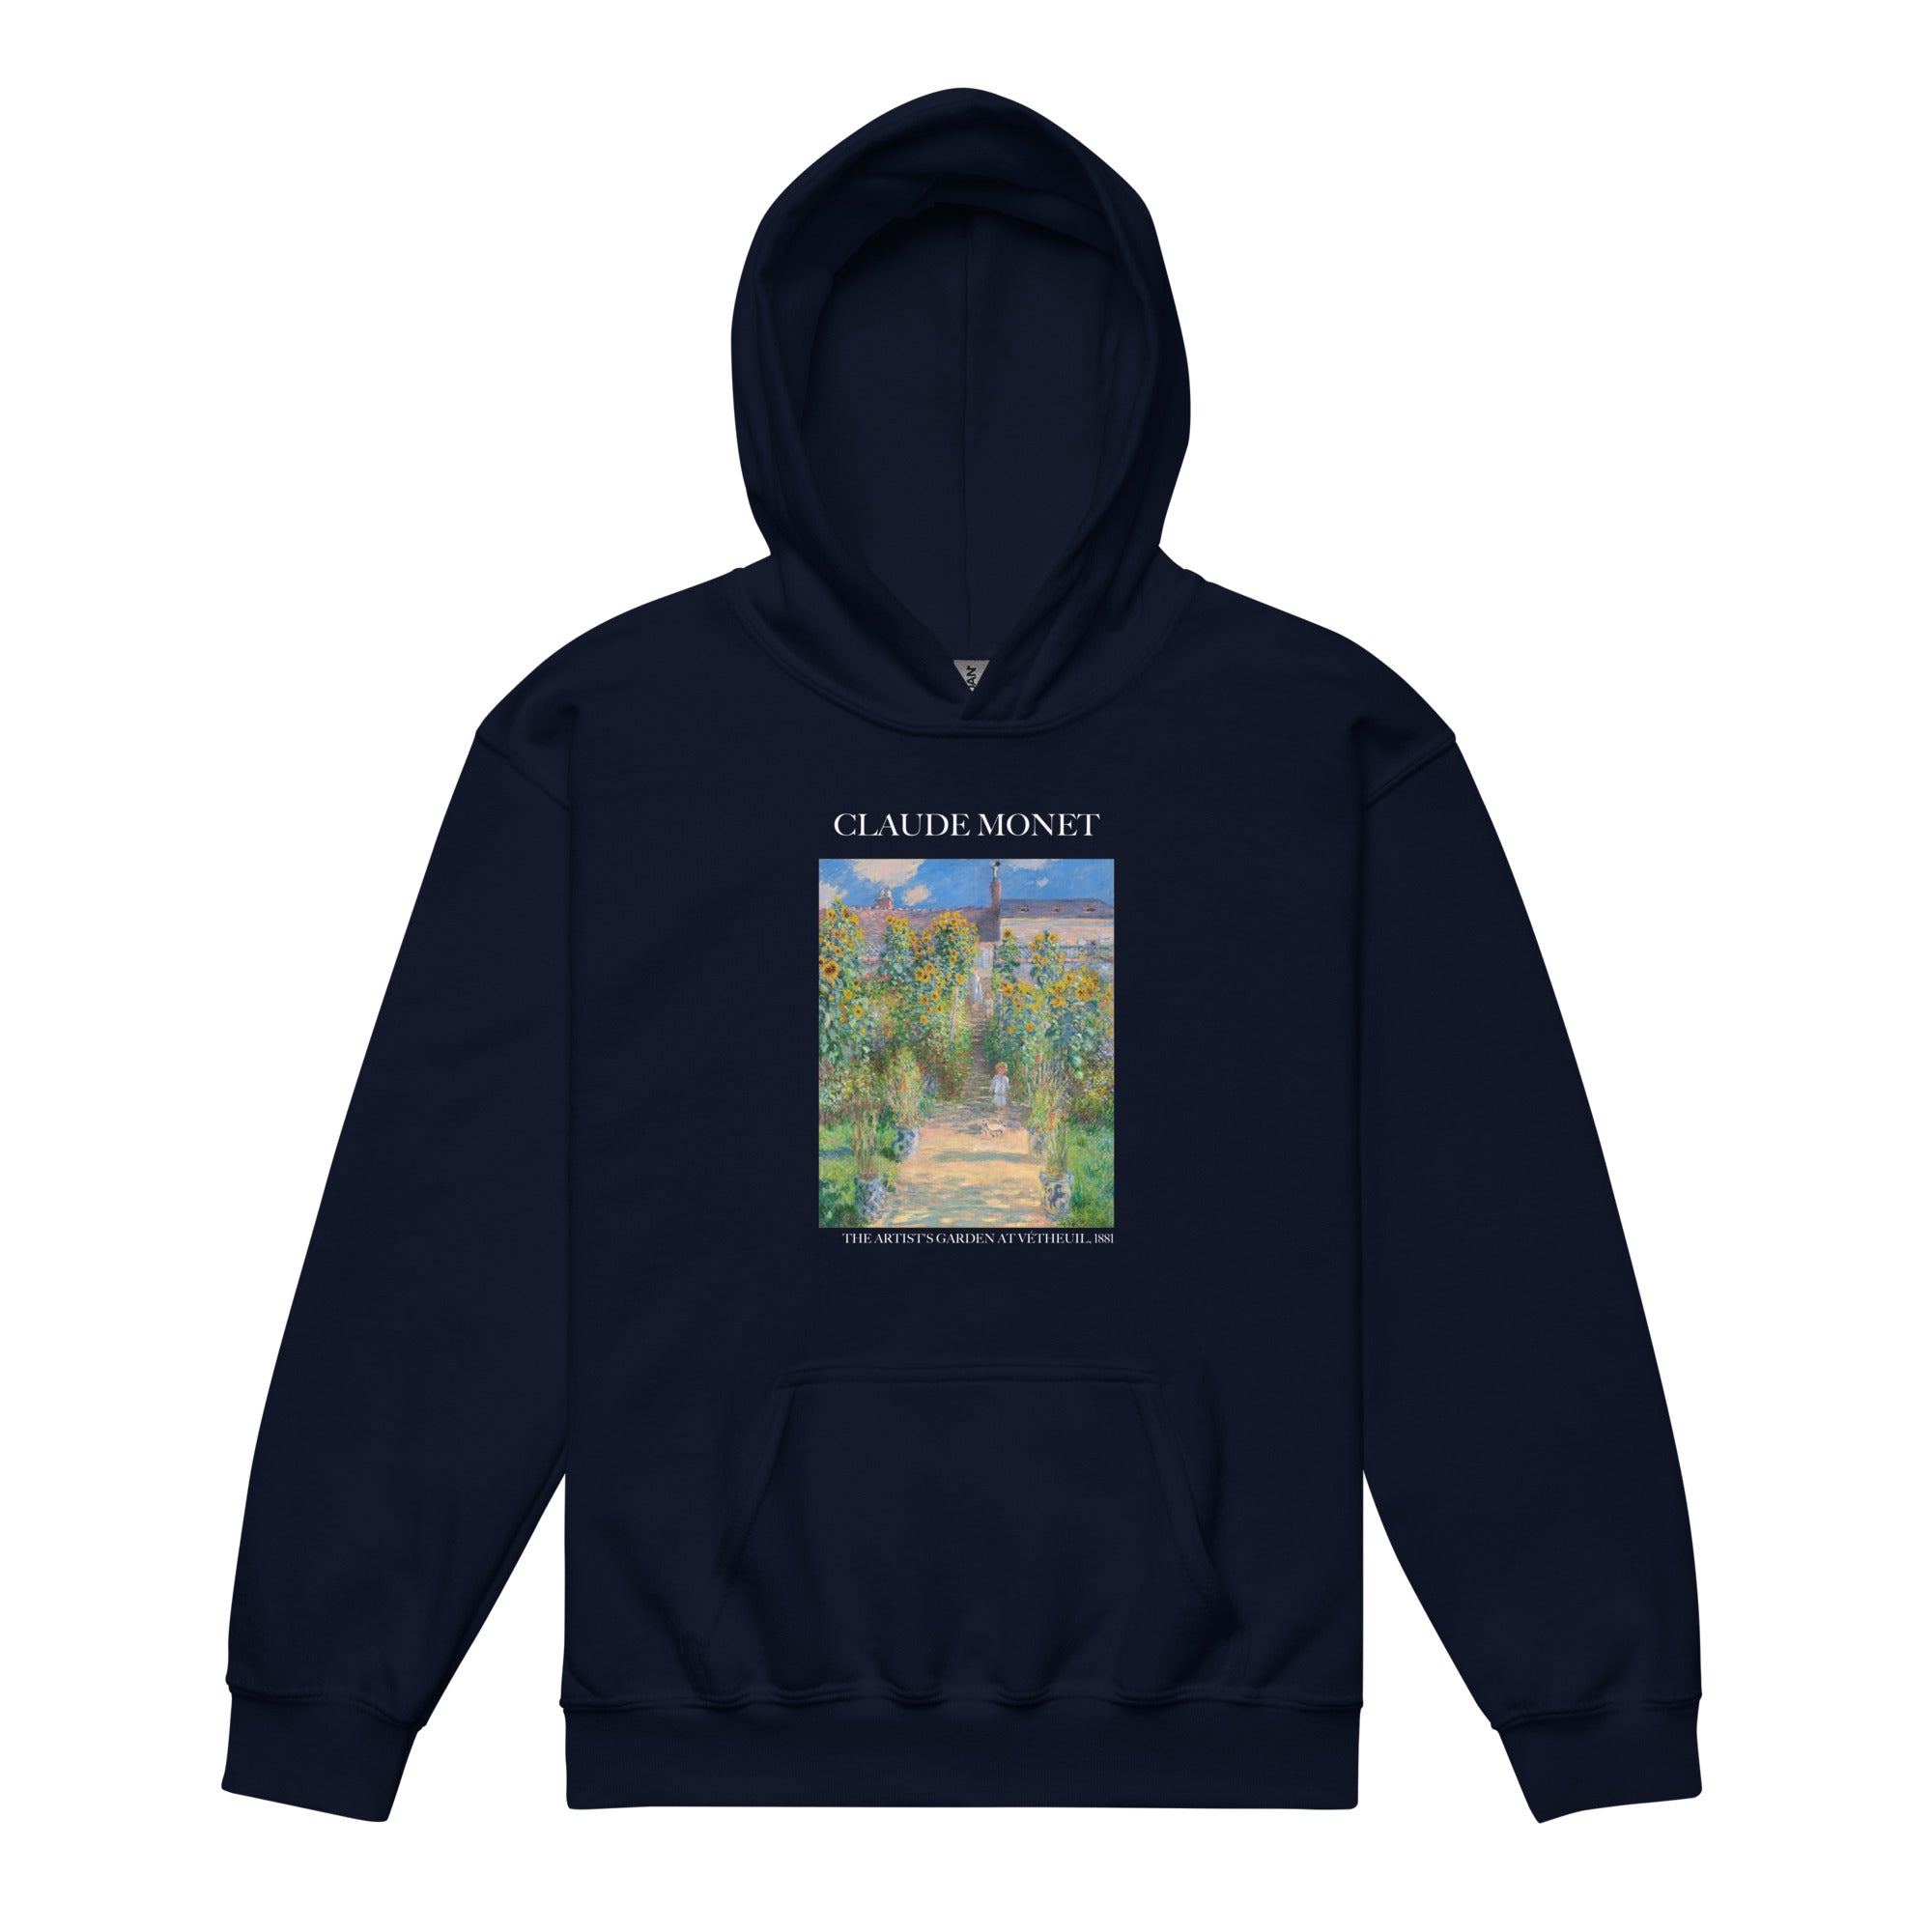 Claude Monet 'The Artist's Garden at Vétheuil' Famous Painting Hoodie | Premium Youth Art Hoodie